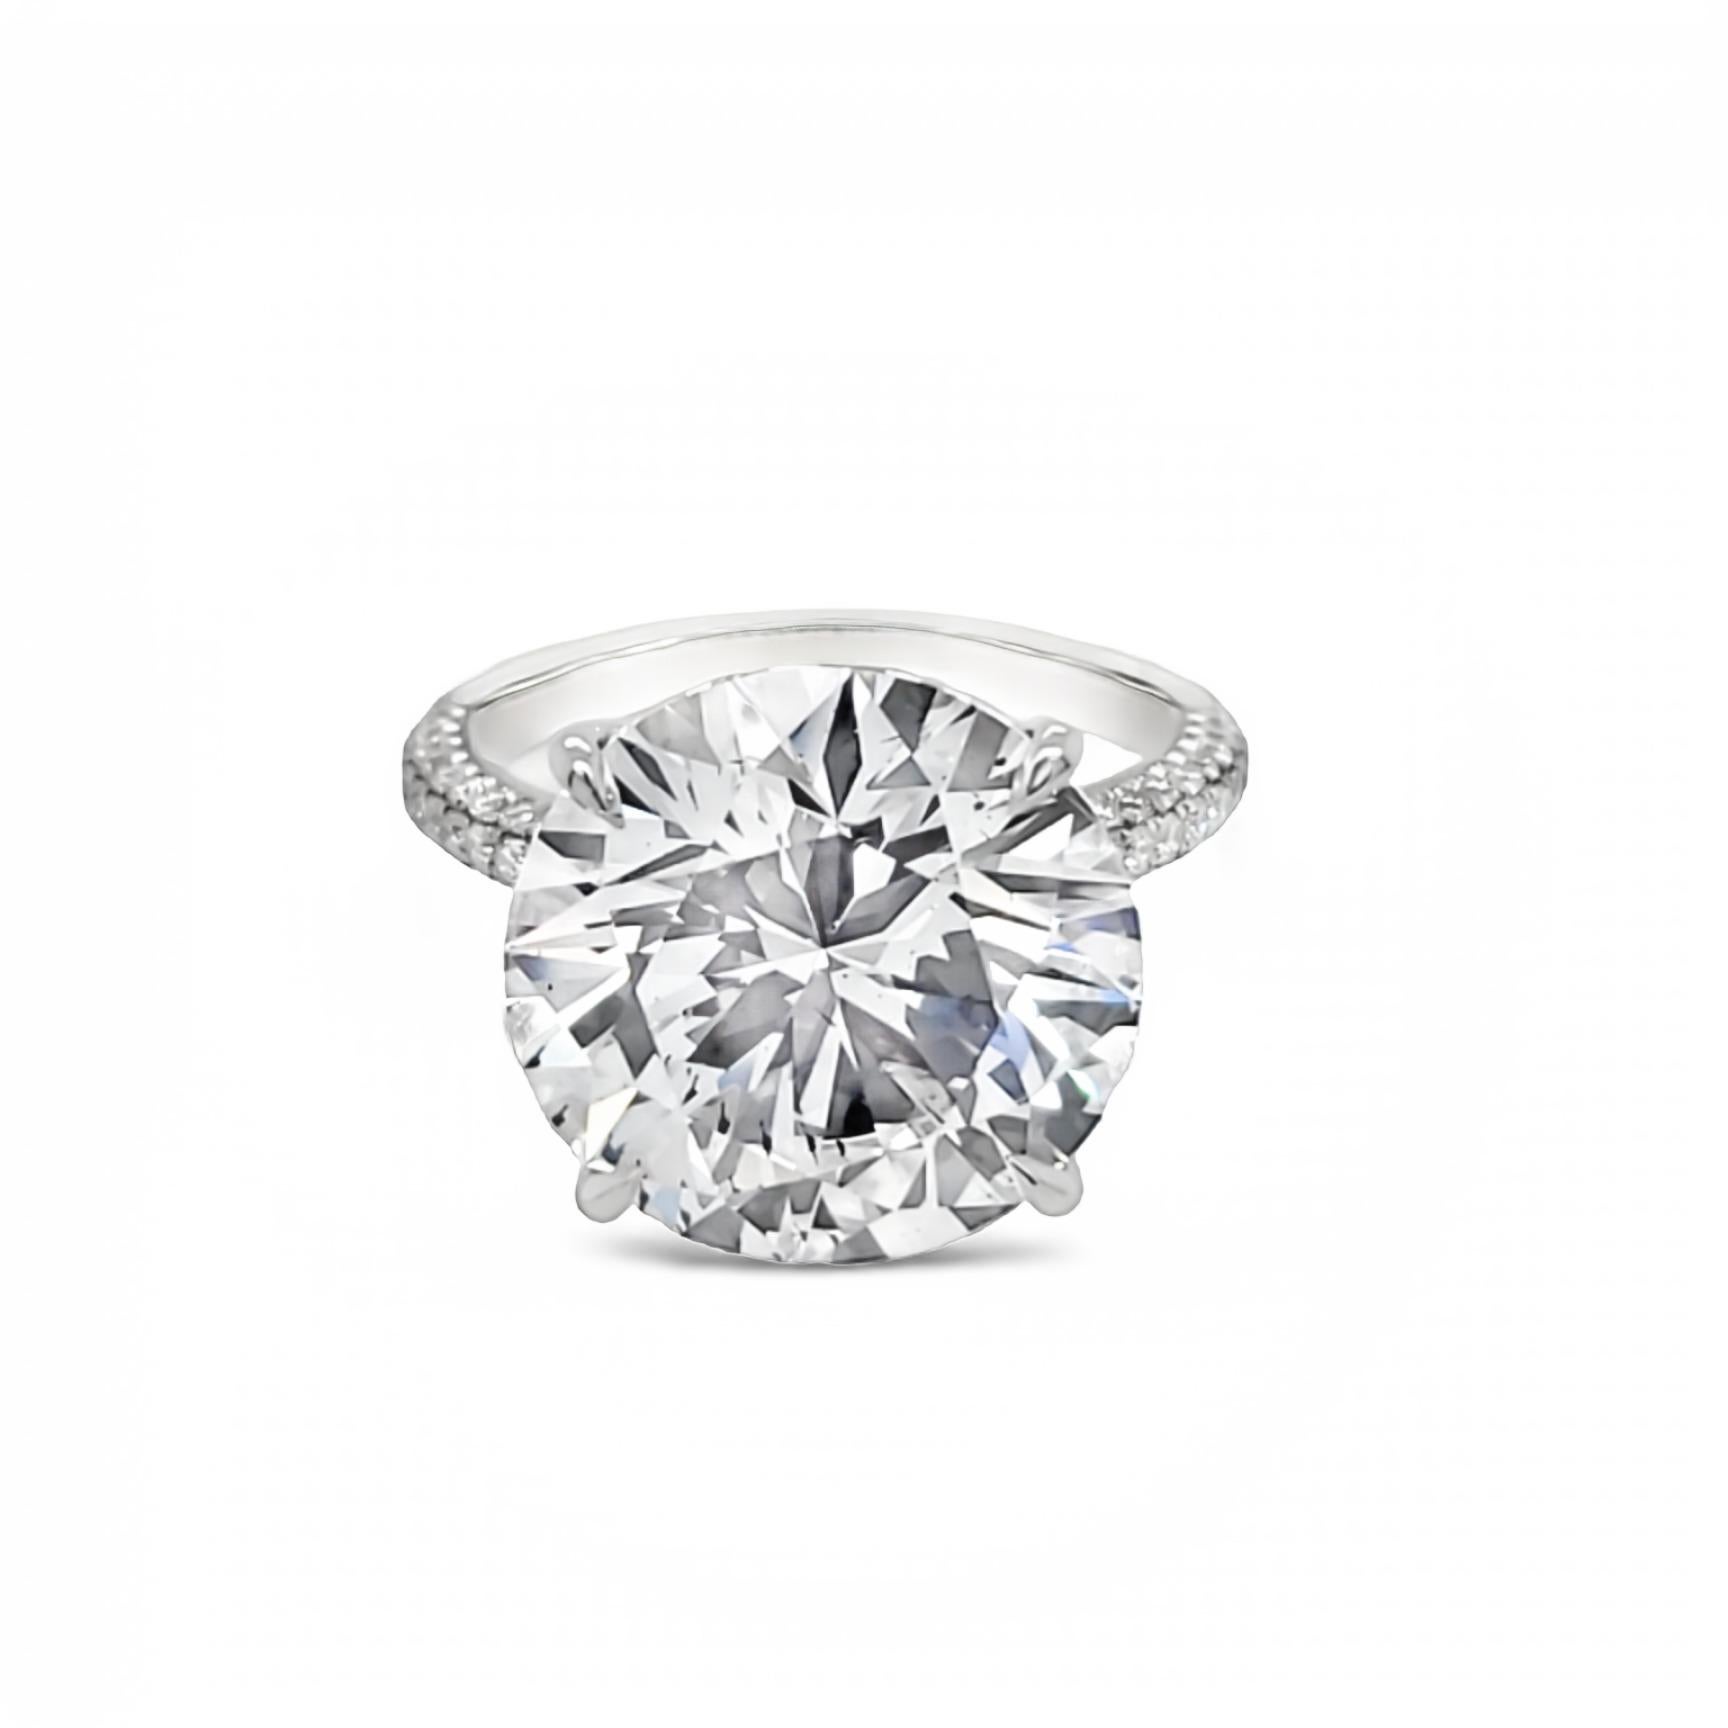 Rosenberg Diamonds & Co. 9.13 carat Round Brilliant Cut D color SI1 clarity is accompanied by a GIA certificate. This spectacular SI1 is full of brilliance and it is set in a handmade 18 karat white gold setting. This ring continues its elegance